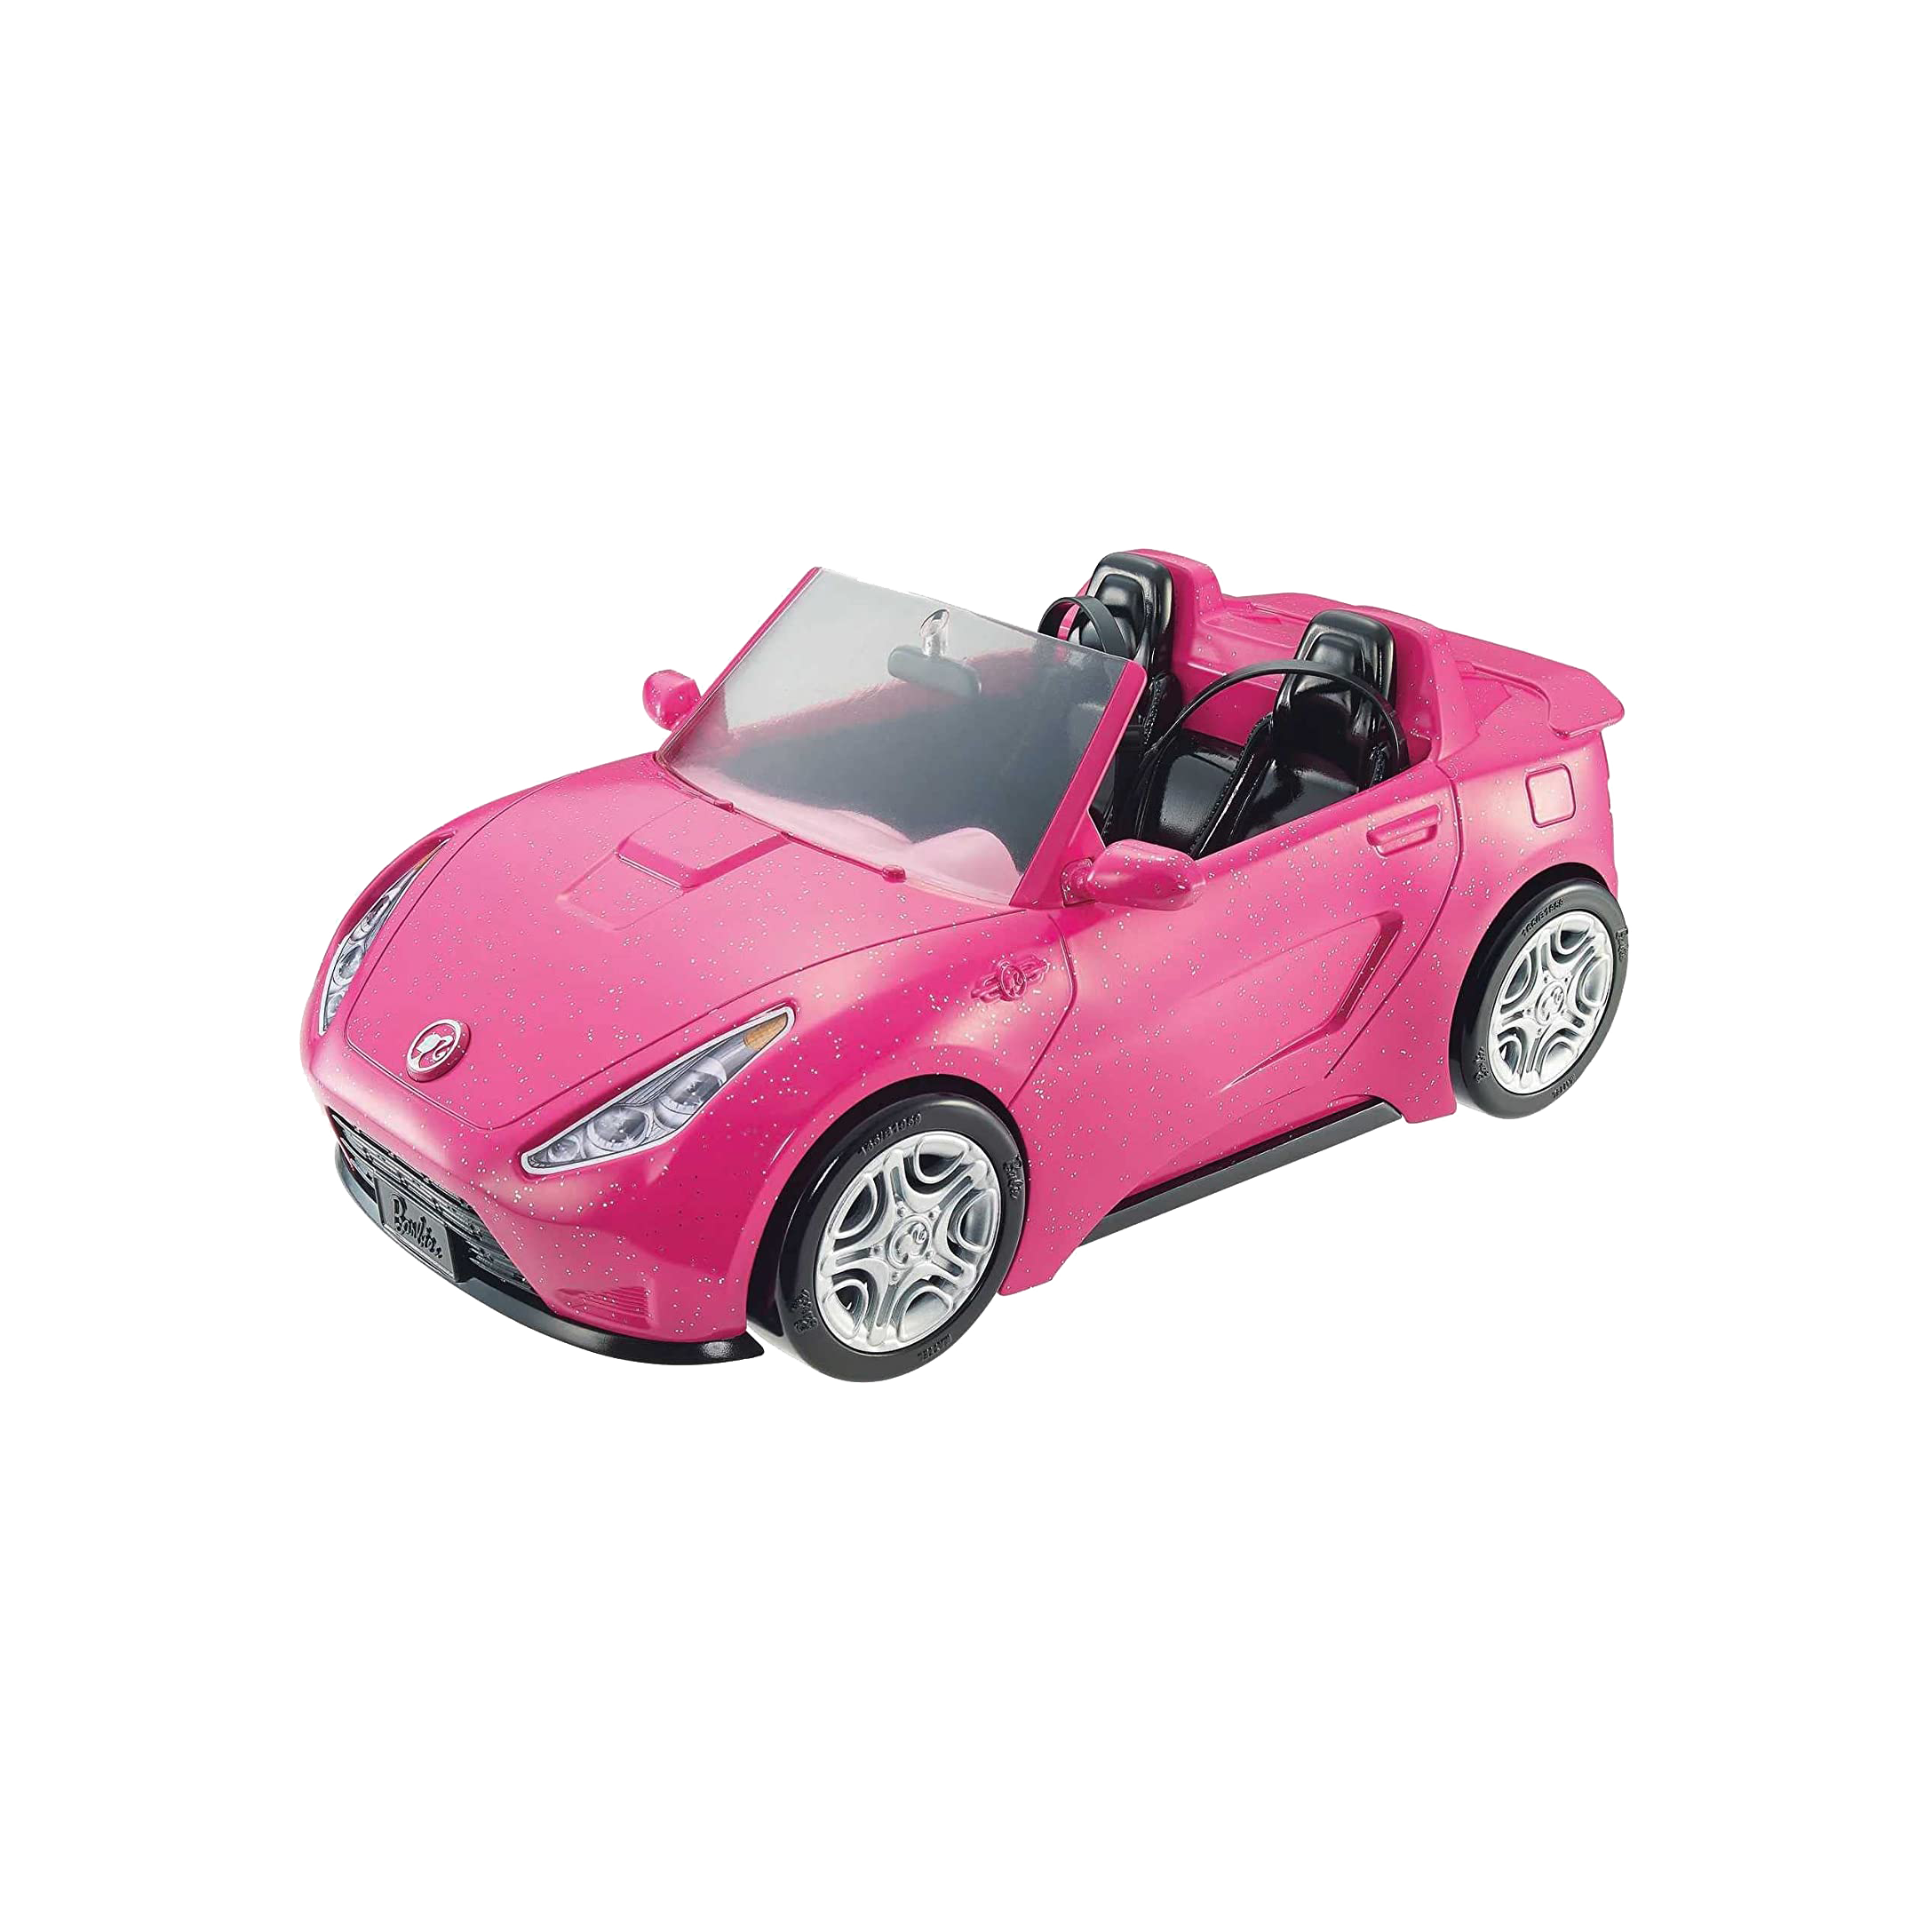 Dakloos Wrijven overstroming Barbie Convertible: Gift Idea For Birthday, Child, Christmas, Her